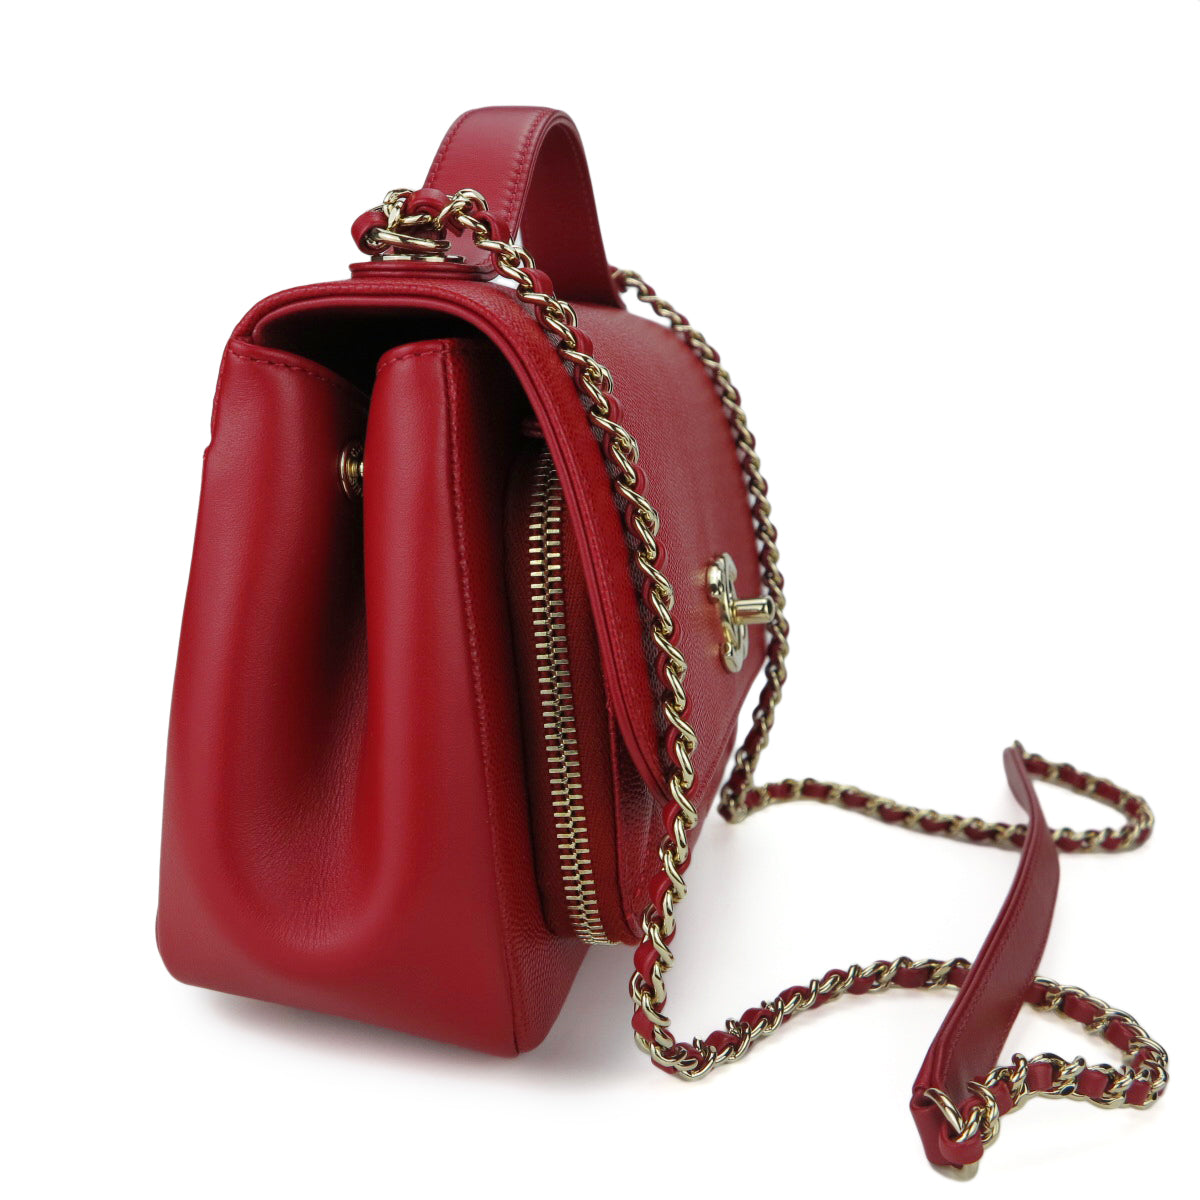 Small Business Affinity Flap Bag in Red Caviar